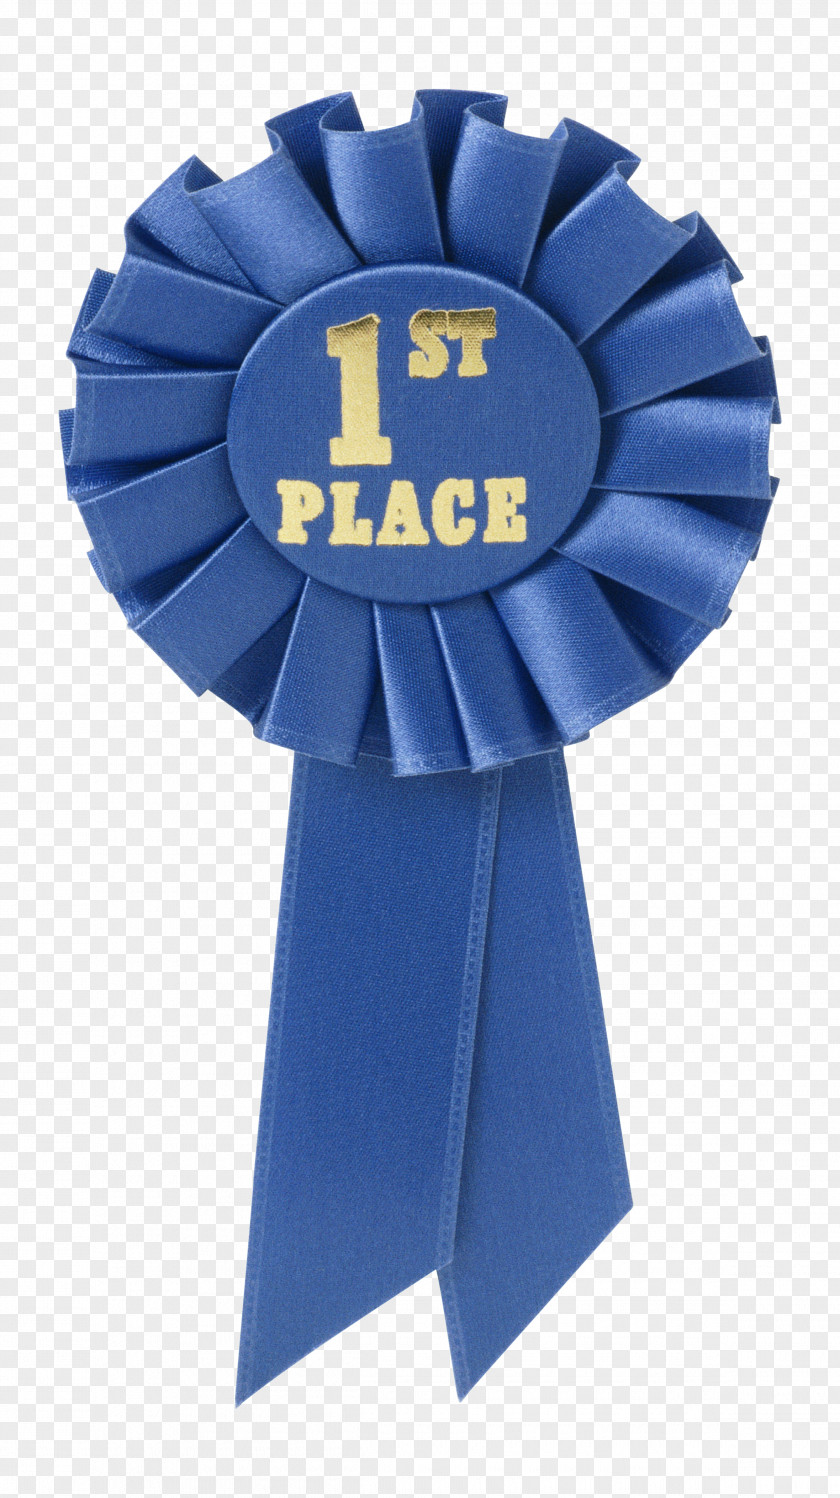 Blue Cloth First Medal Ribbon Prize Competition Clip Art PNG